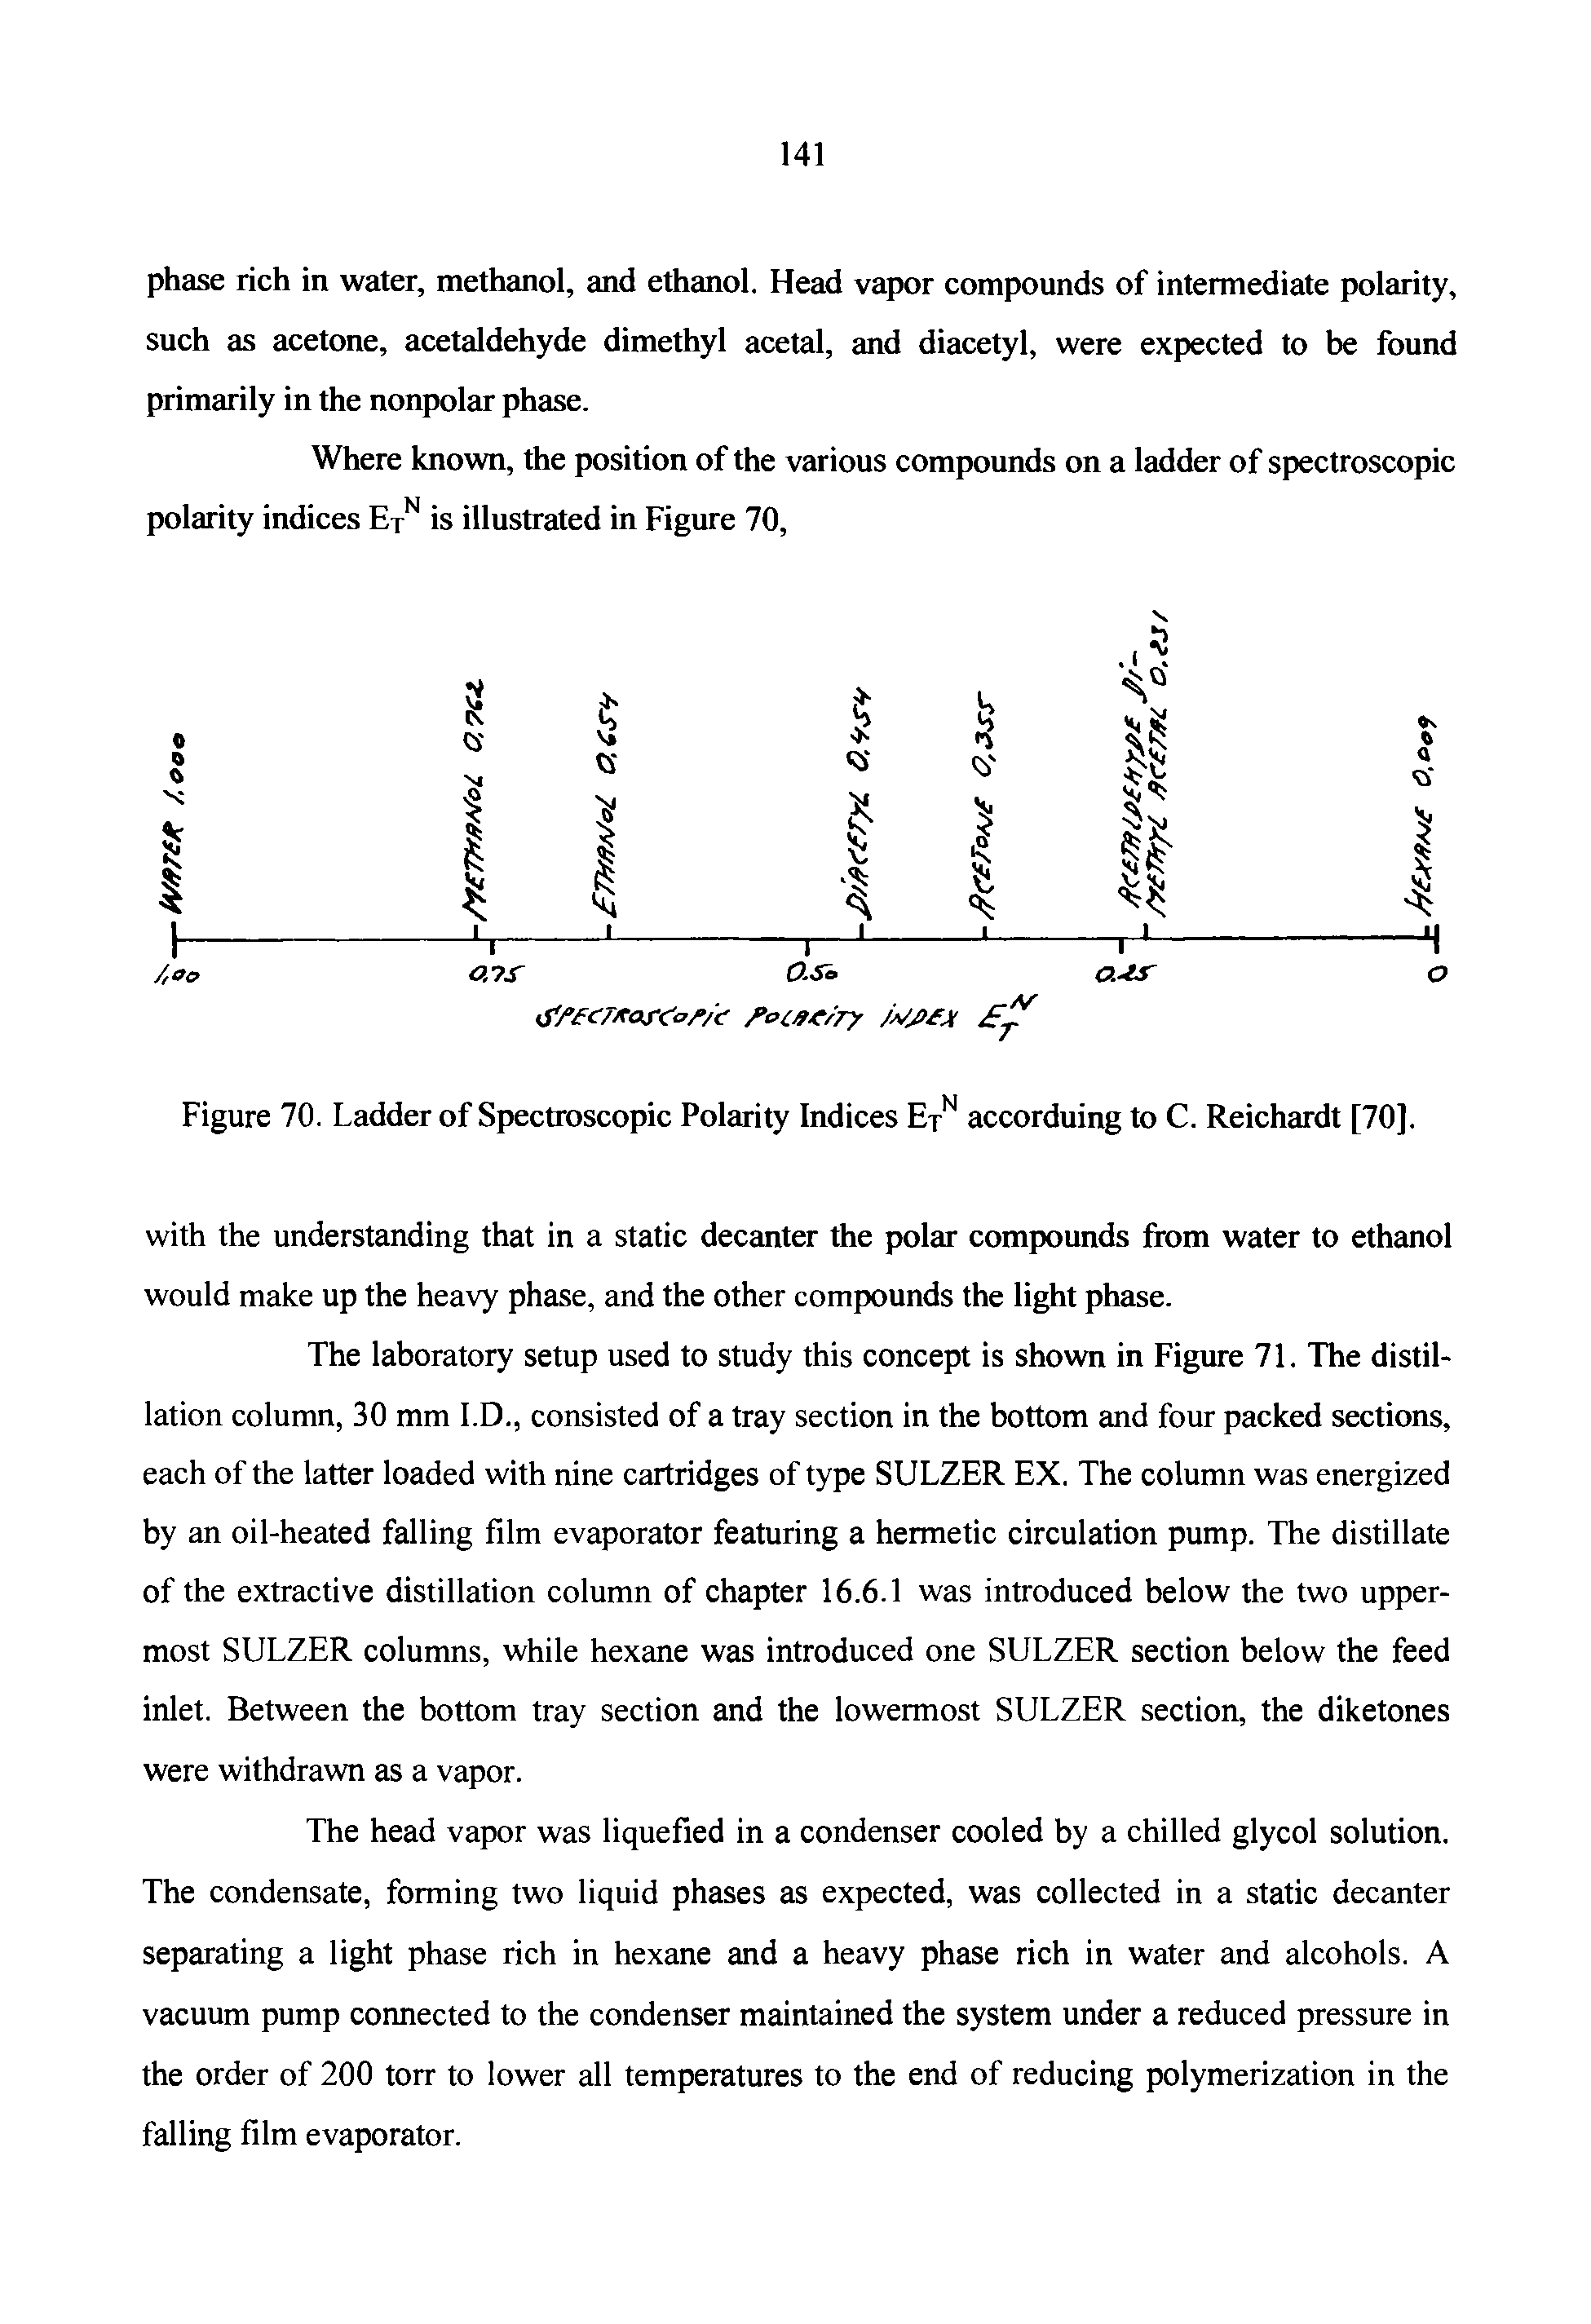 Figure 70. Ladder of Spectroscopic Polarity Indices accorduing to C. Reichardt [70].